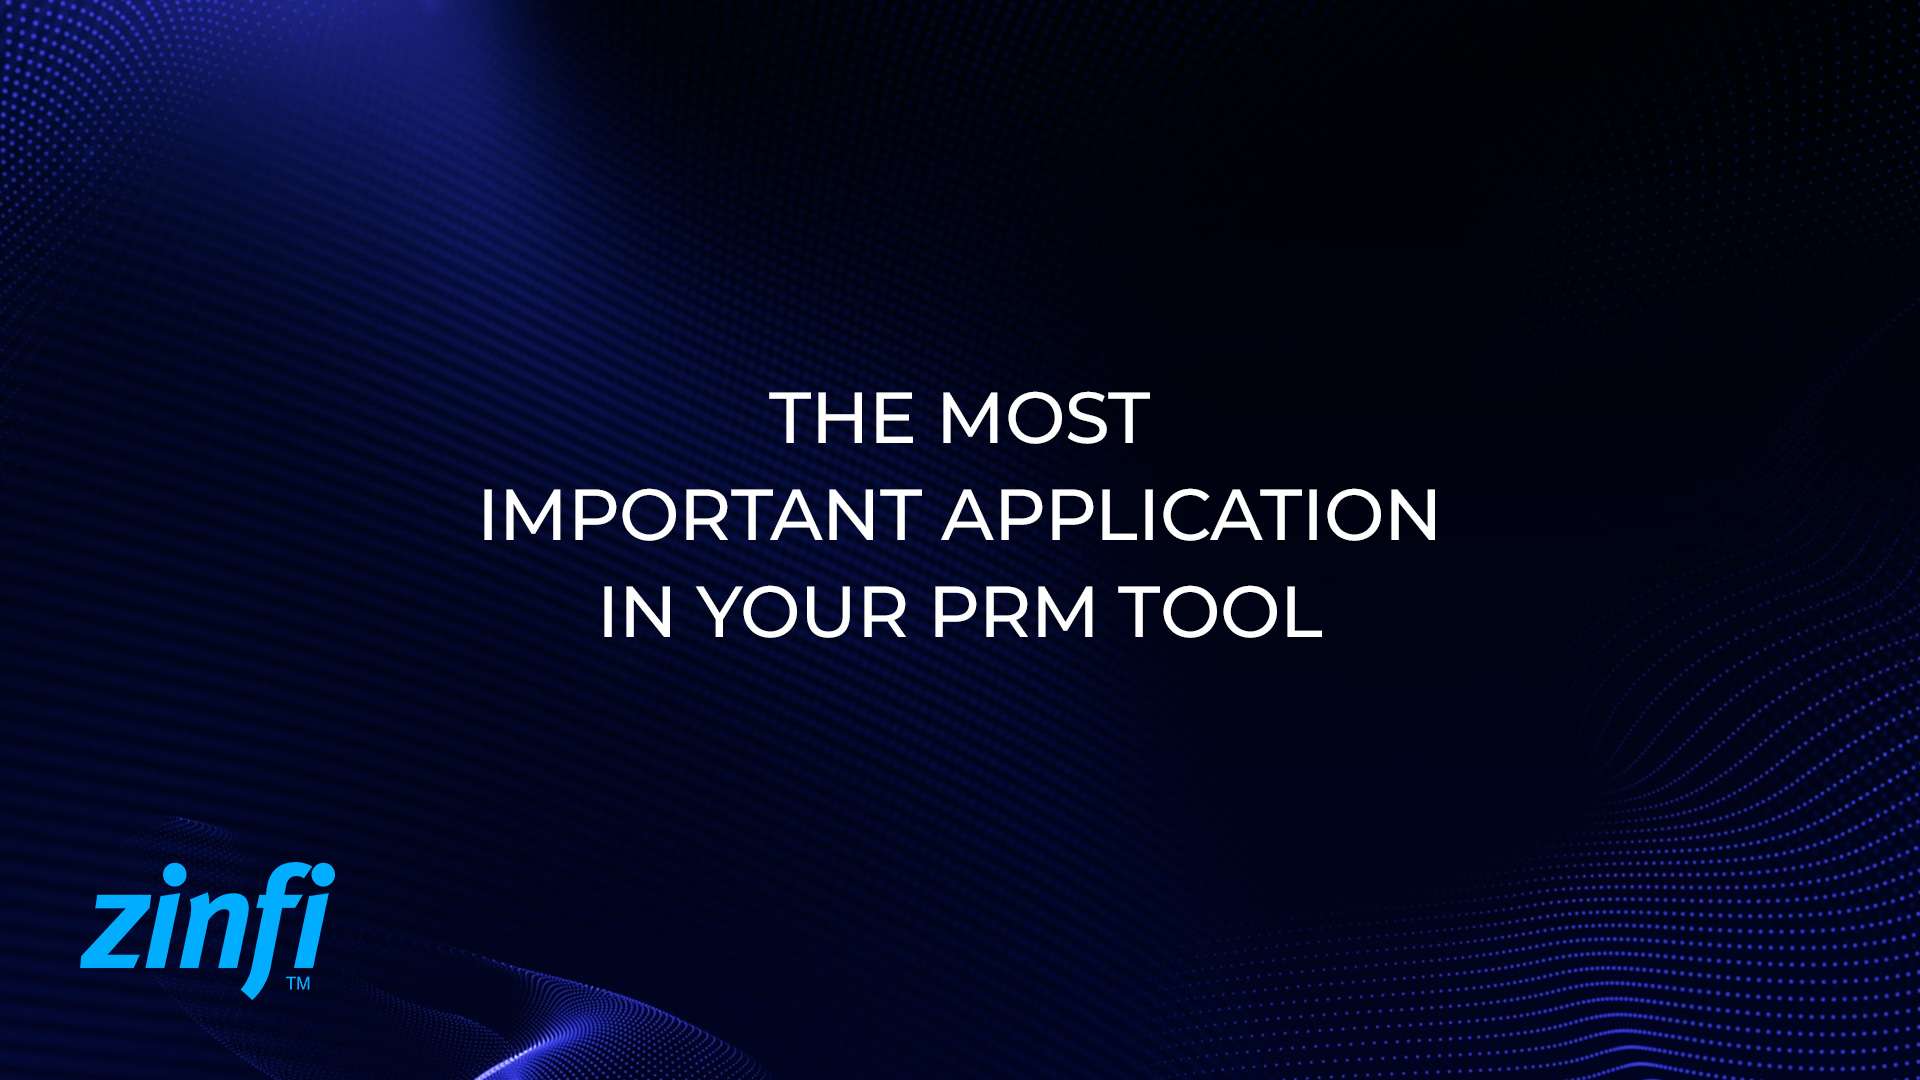 Imortant application in PRM Tool